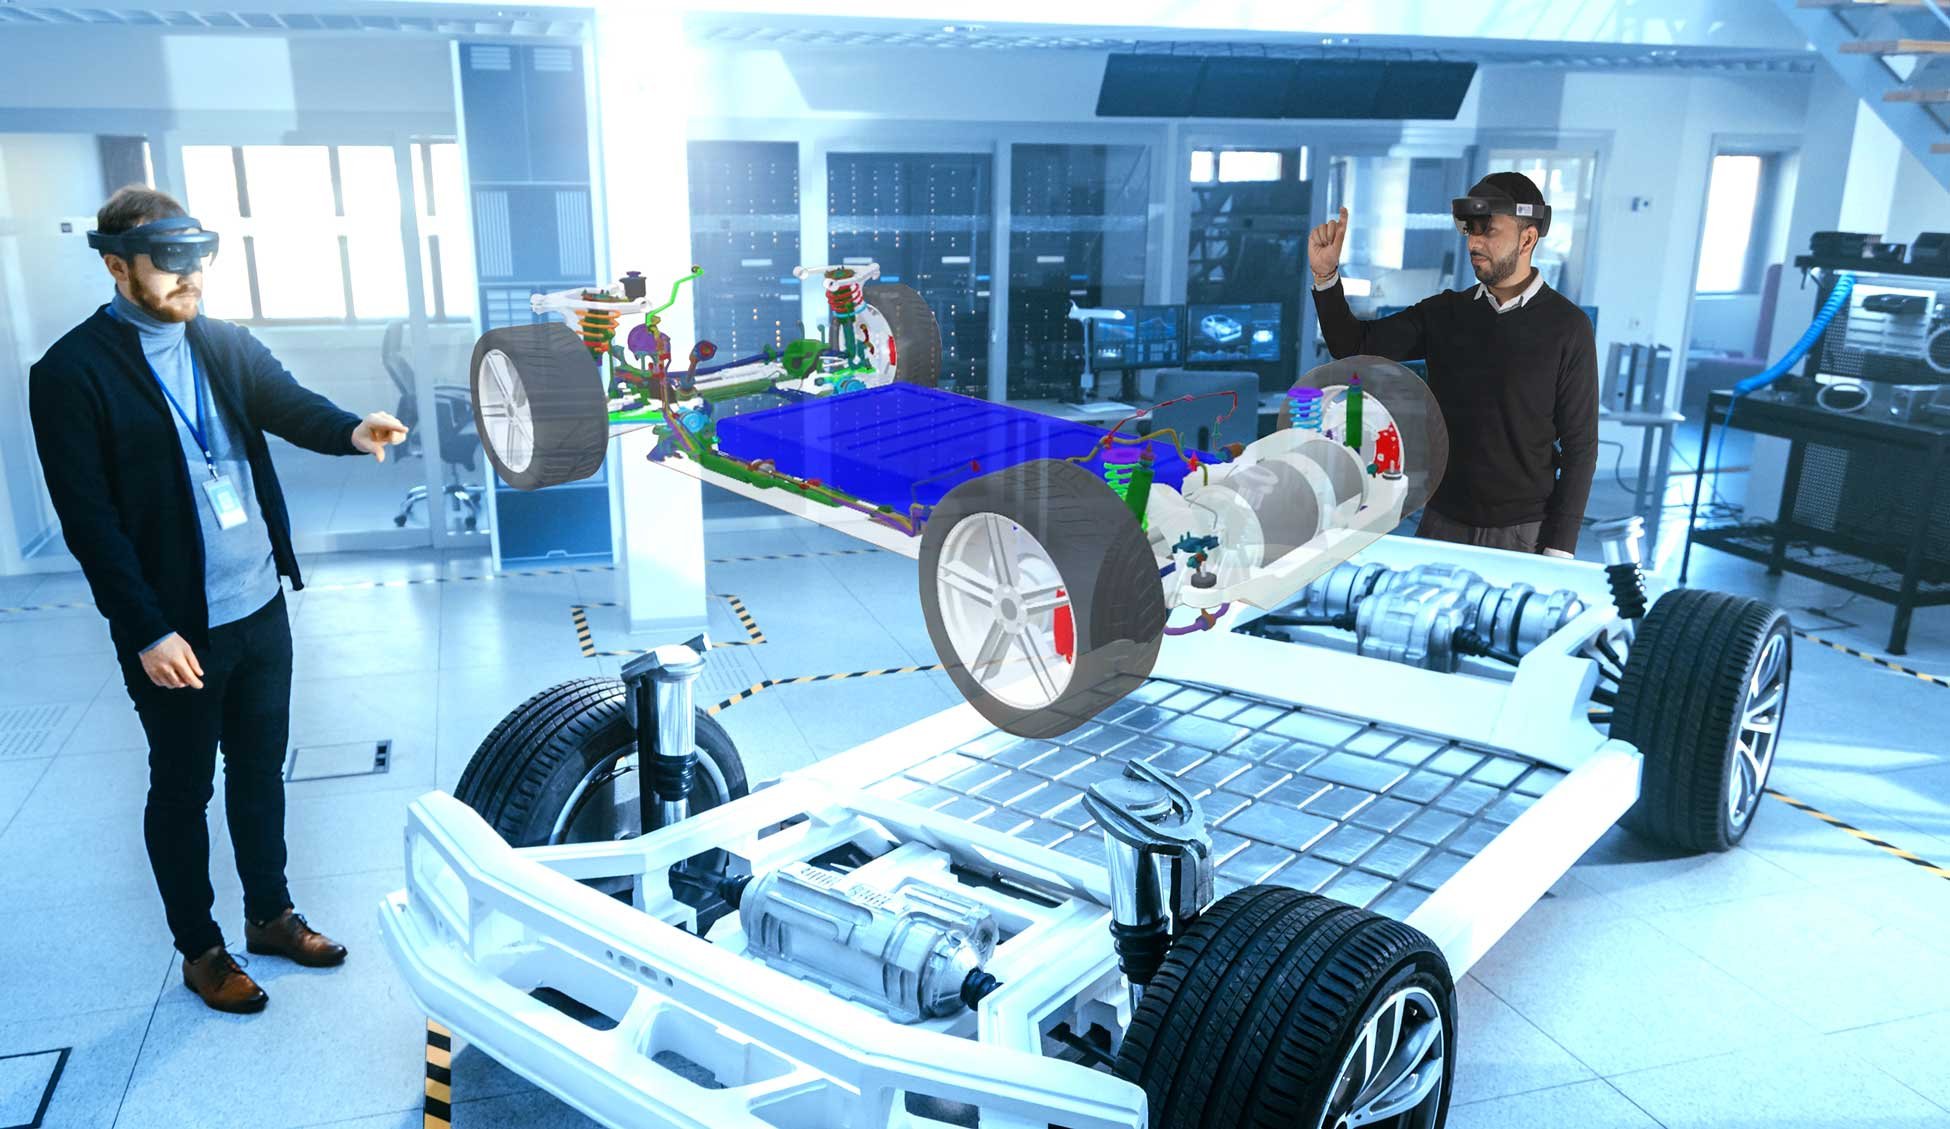 Collaboratively reviewing a car chasis design using HoloLens 2 Mixed Reality and TheoremXR.